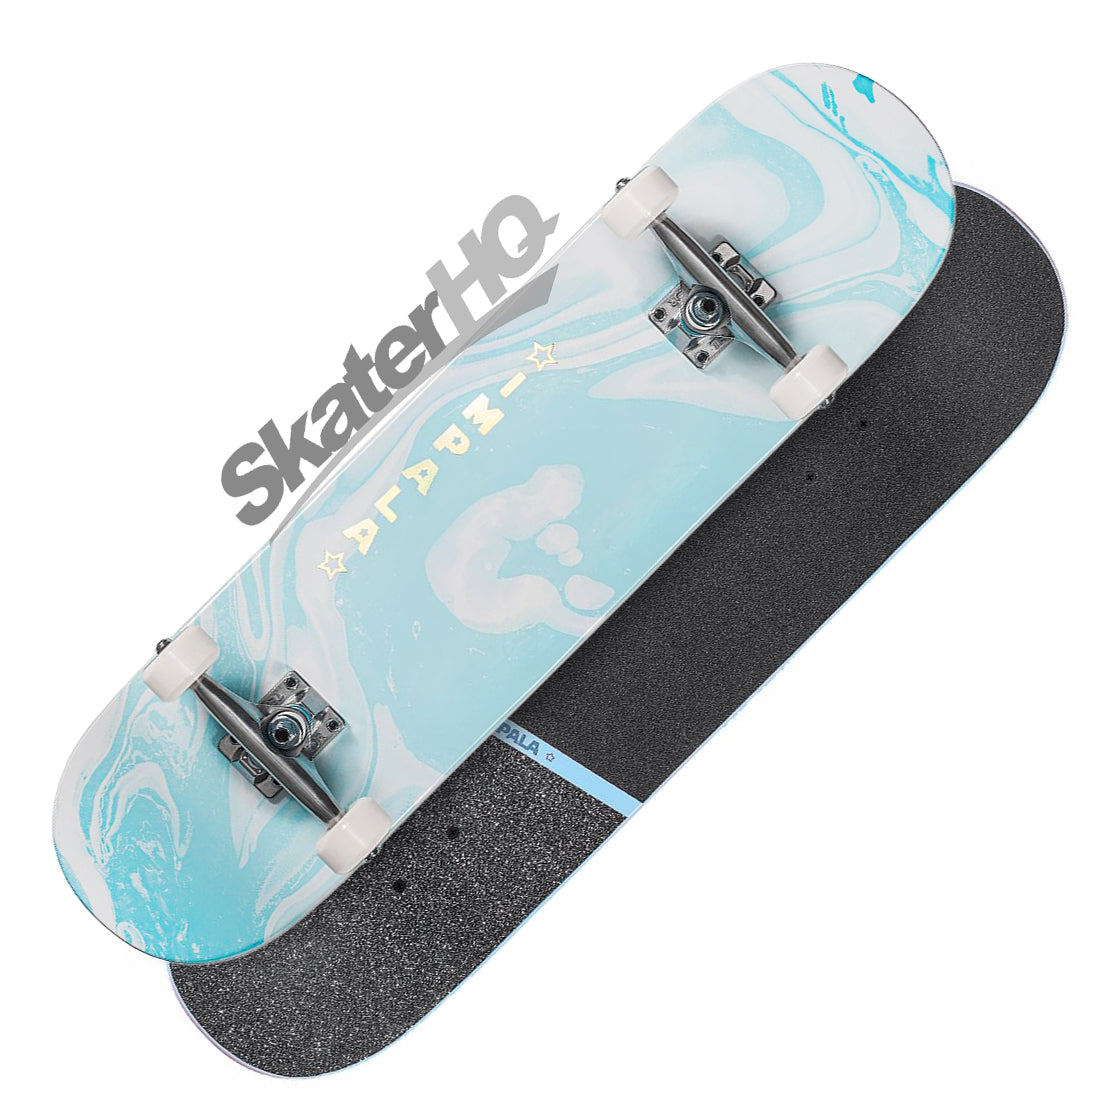 Impala Cosmos 8.0 Complete - Blue Skateboard Completes Modern Street